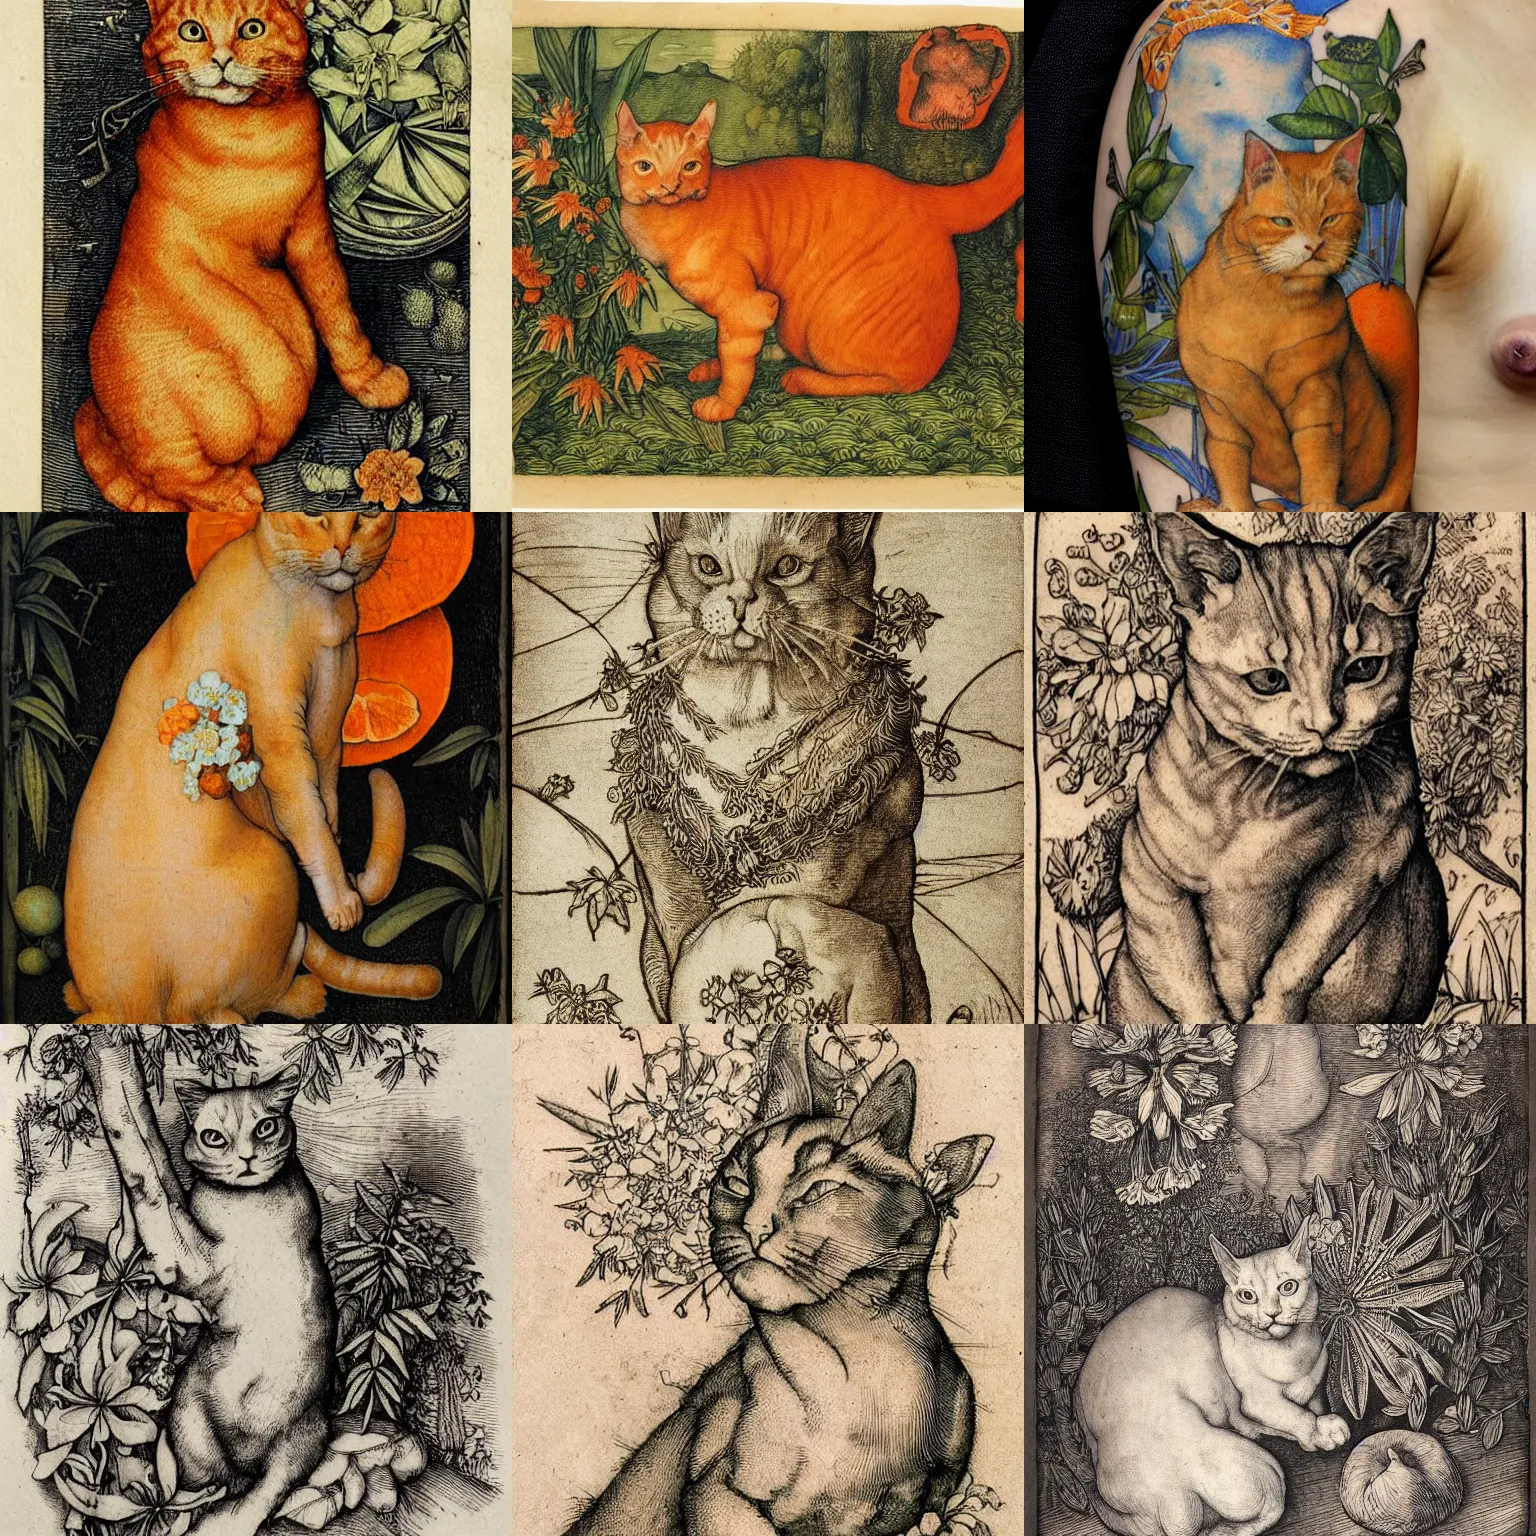 Prompt: albrecht durer, albrecht altdorfer, hans holbein, lucas cranach, gustave dore, engraving-style tattoo of orange and white cat surrounded by orange blossoms